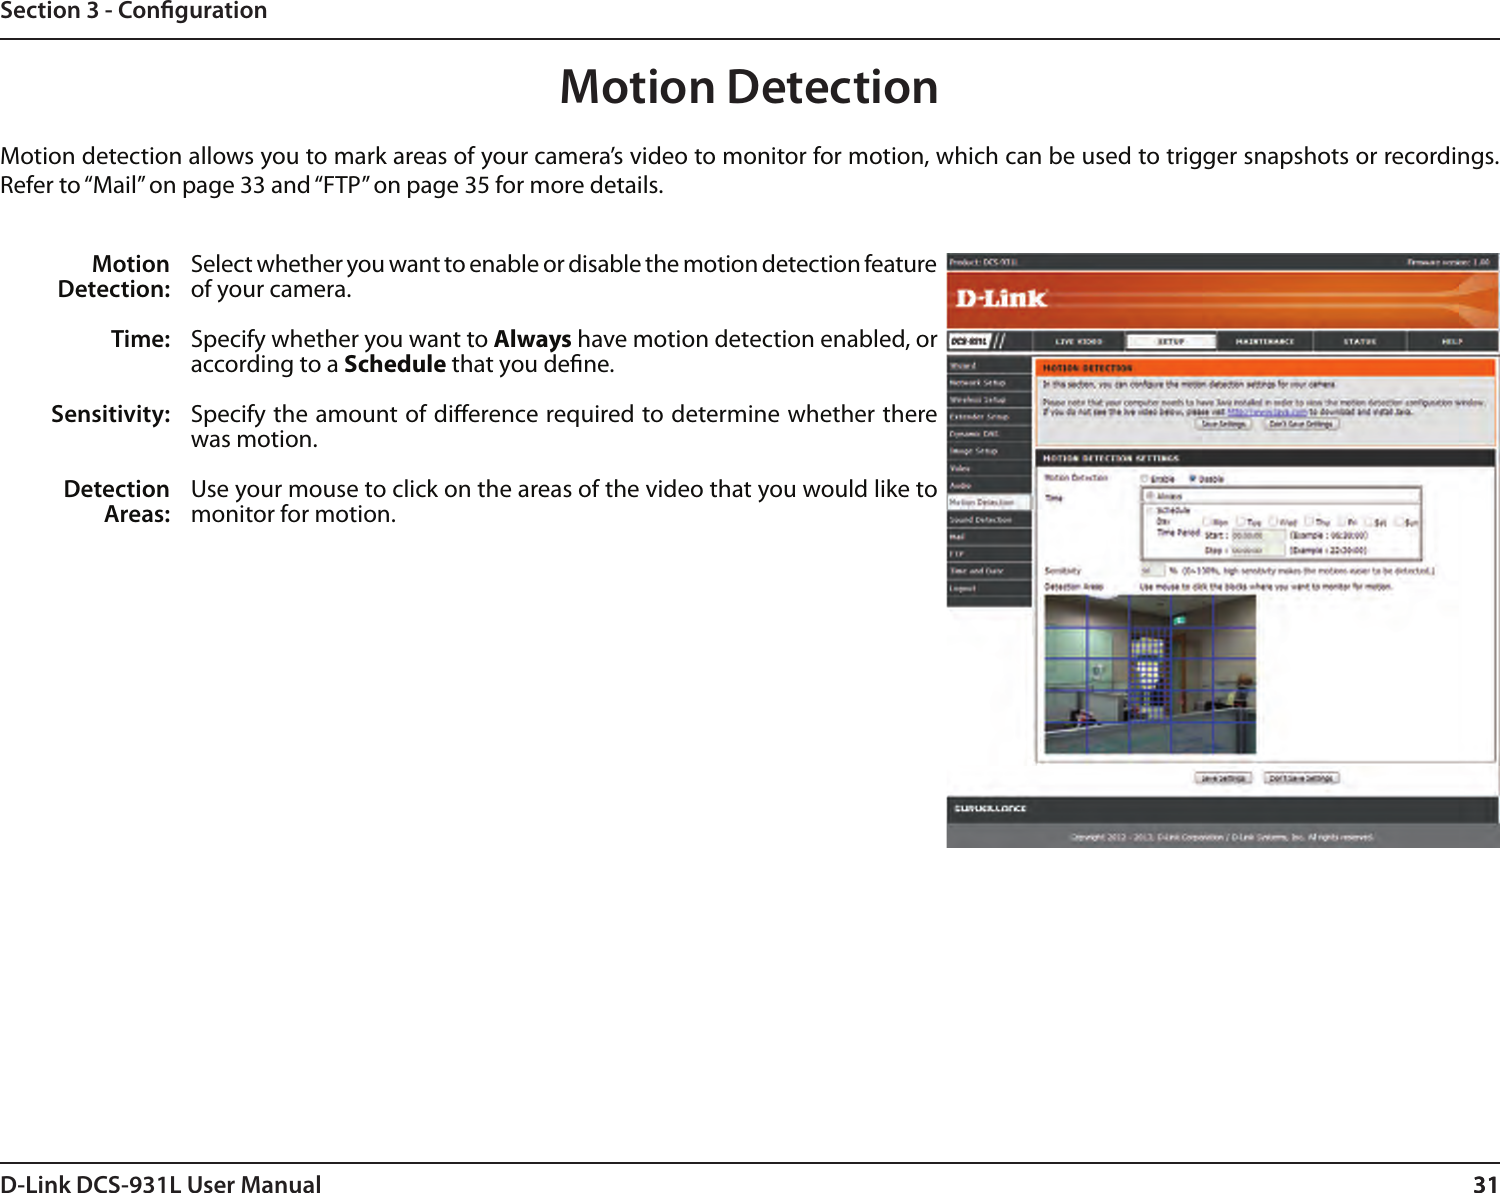 31D-Link DCS-931L User Manual 31Section 3 - CongurationMotion DetectionMotion detection allows you to mark areas of your camera’s video to monitor for motion, which can be used to trigger snapshots or recordings. Refer to “Mail” on page 33 and “FTP” on page 35 for more details.Motion Detection:Time:Sensitivity:Detection Areas:Select whether you want to enable or disable the motion detection feature of your camera.Specify whether you want to Always have motion detection enabled, or according to a Schedule that you dene.Specify the amount of dierence required to determine whether there was motion.Use your mouse to click on the areas of the video that you would like to monitor for motion. 